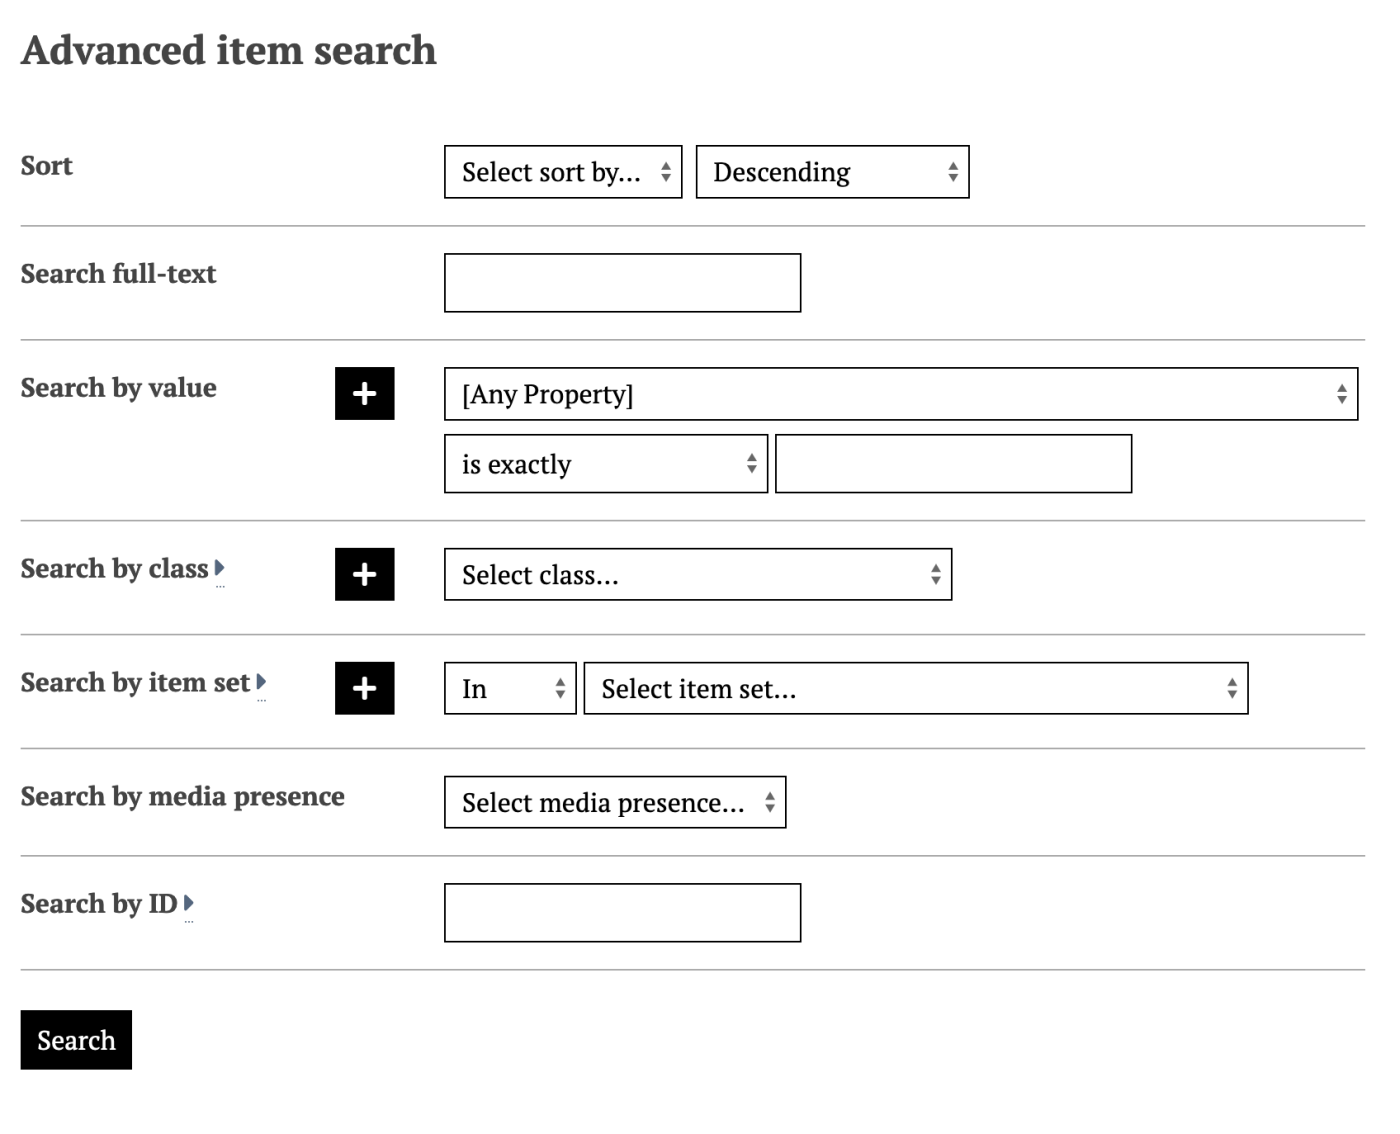 Advanced item search fields as described